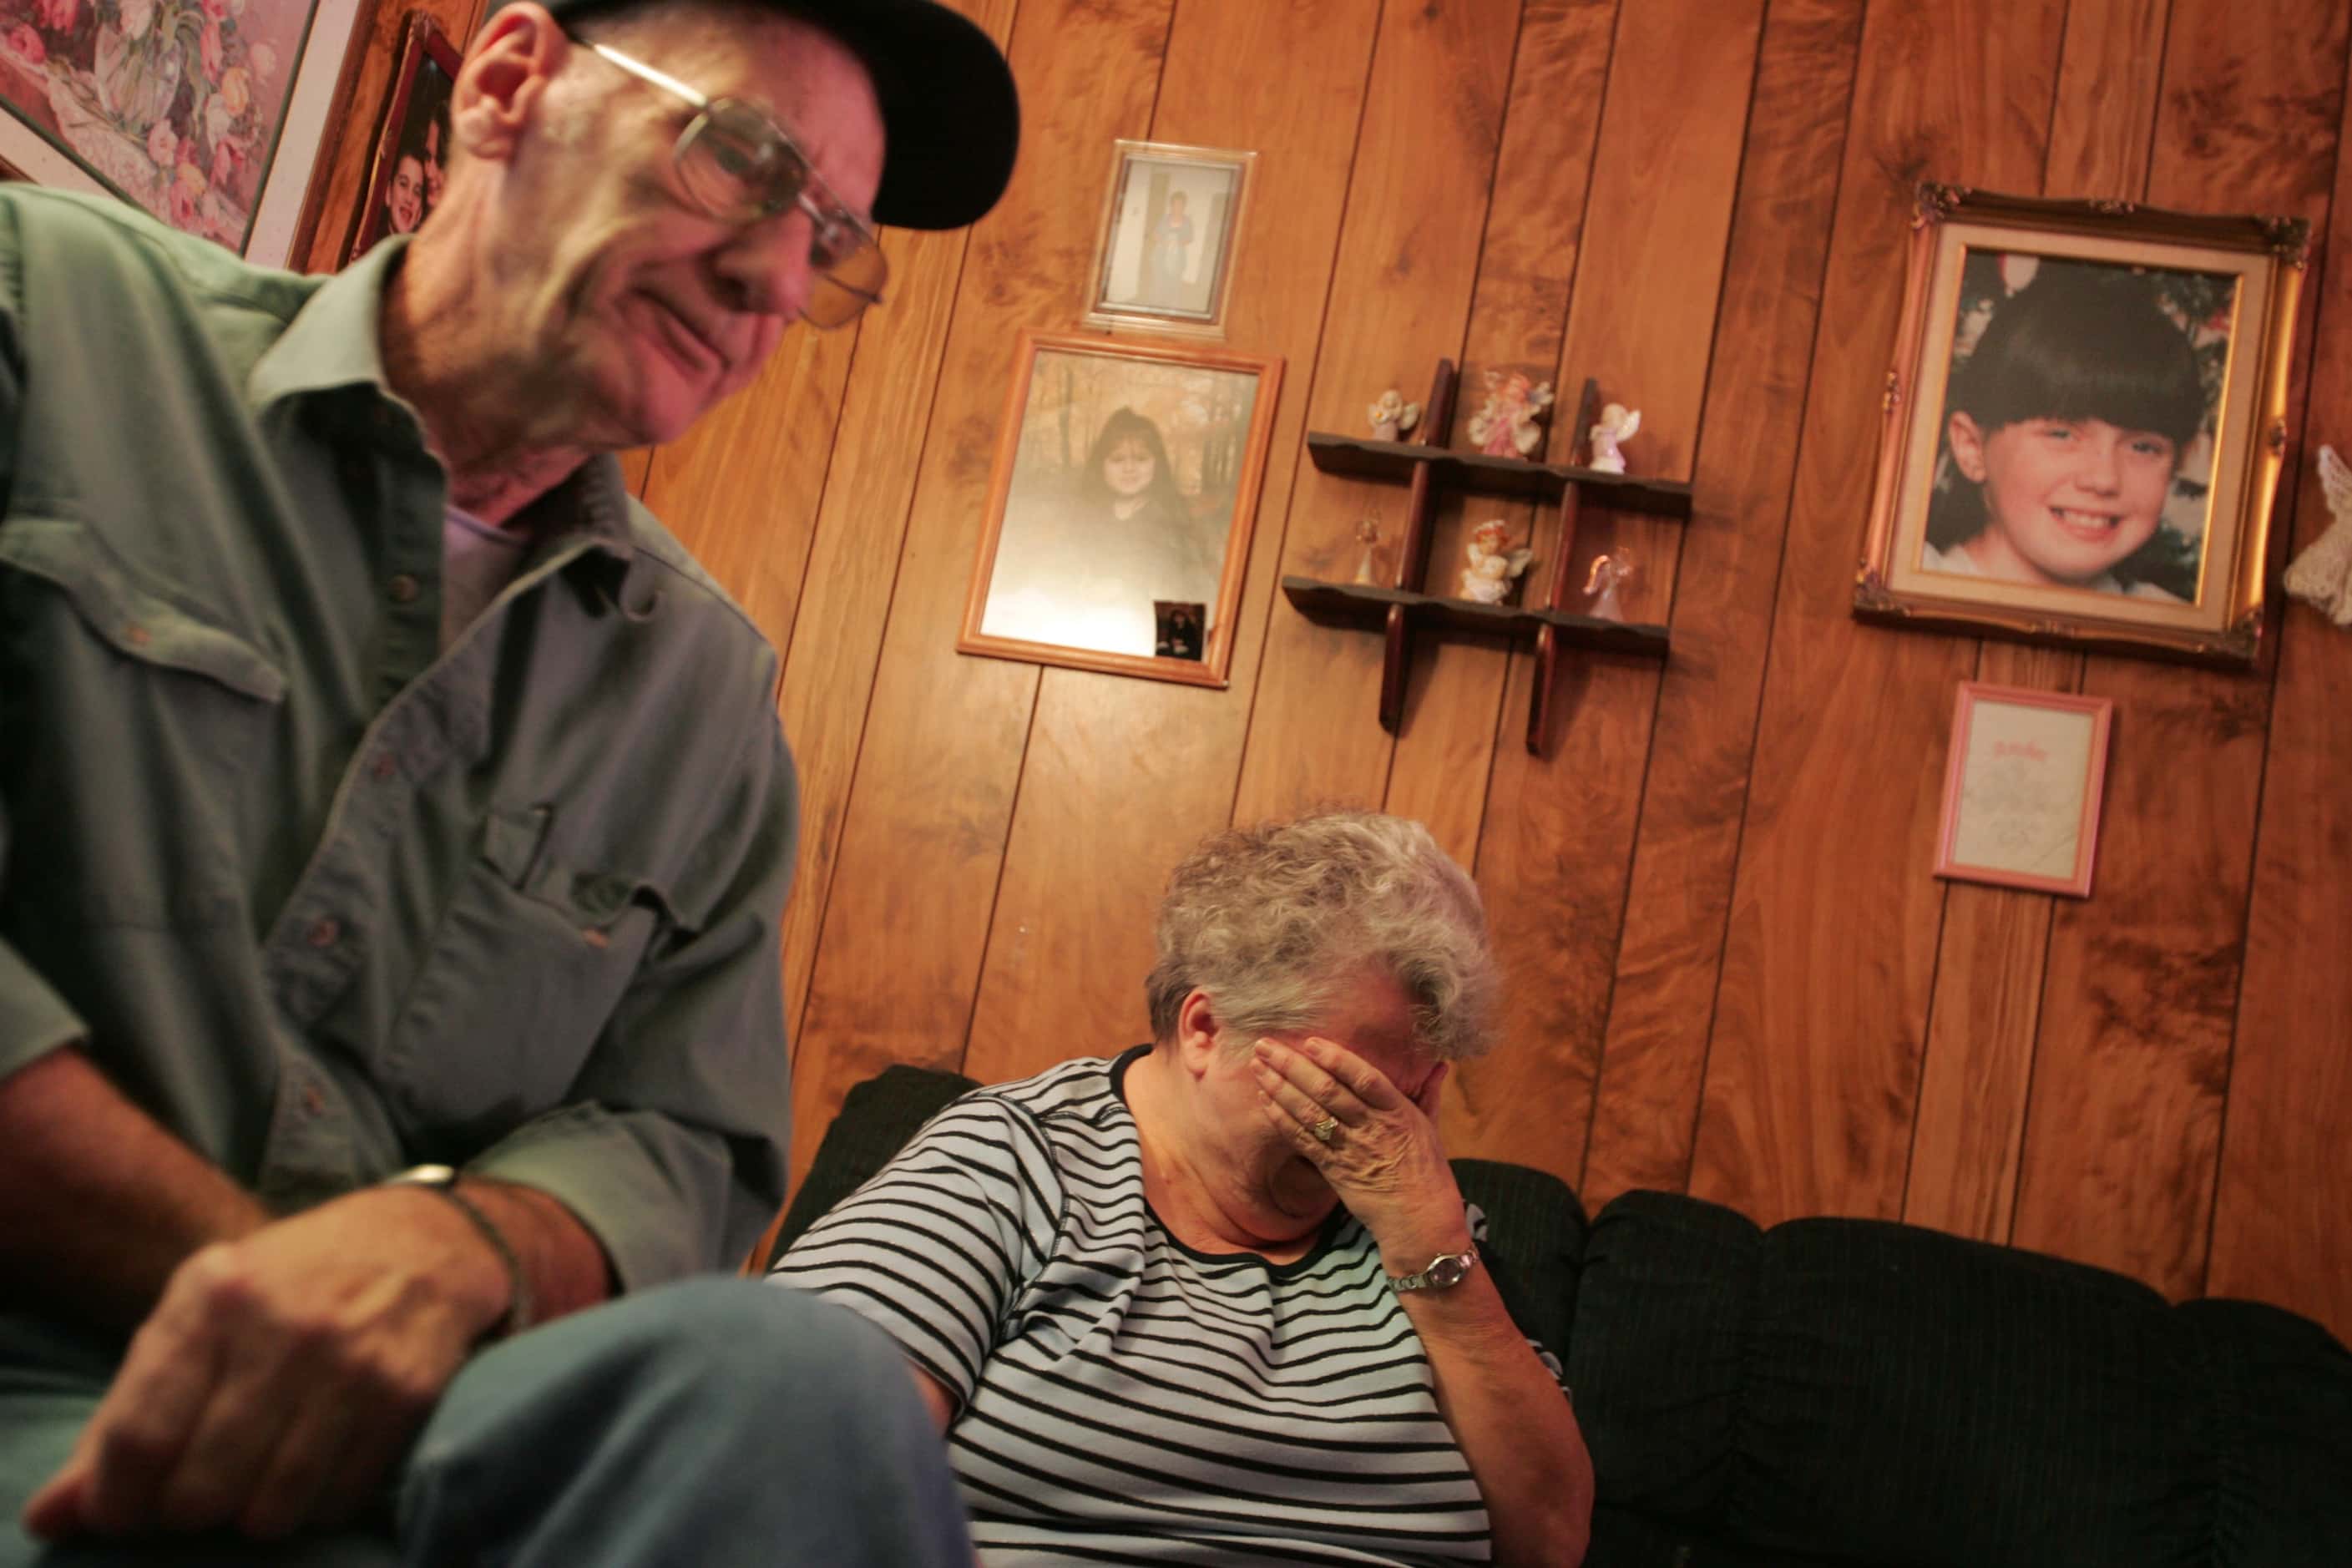 Jimmie and Glenda Whitson, grandparents of Amber Hagerman, reflect Jan. 9, 2006 on Amber's...